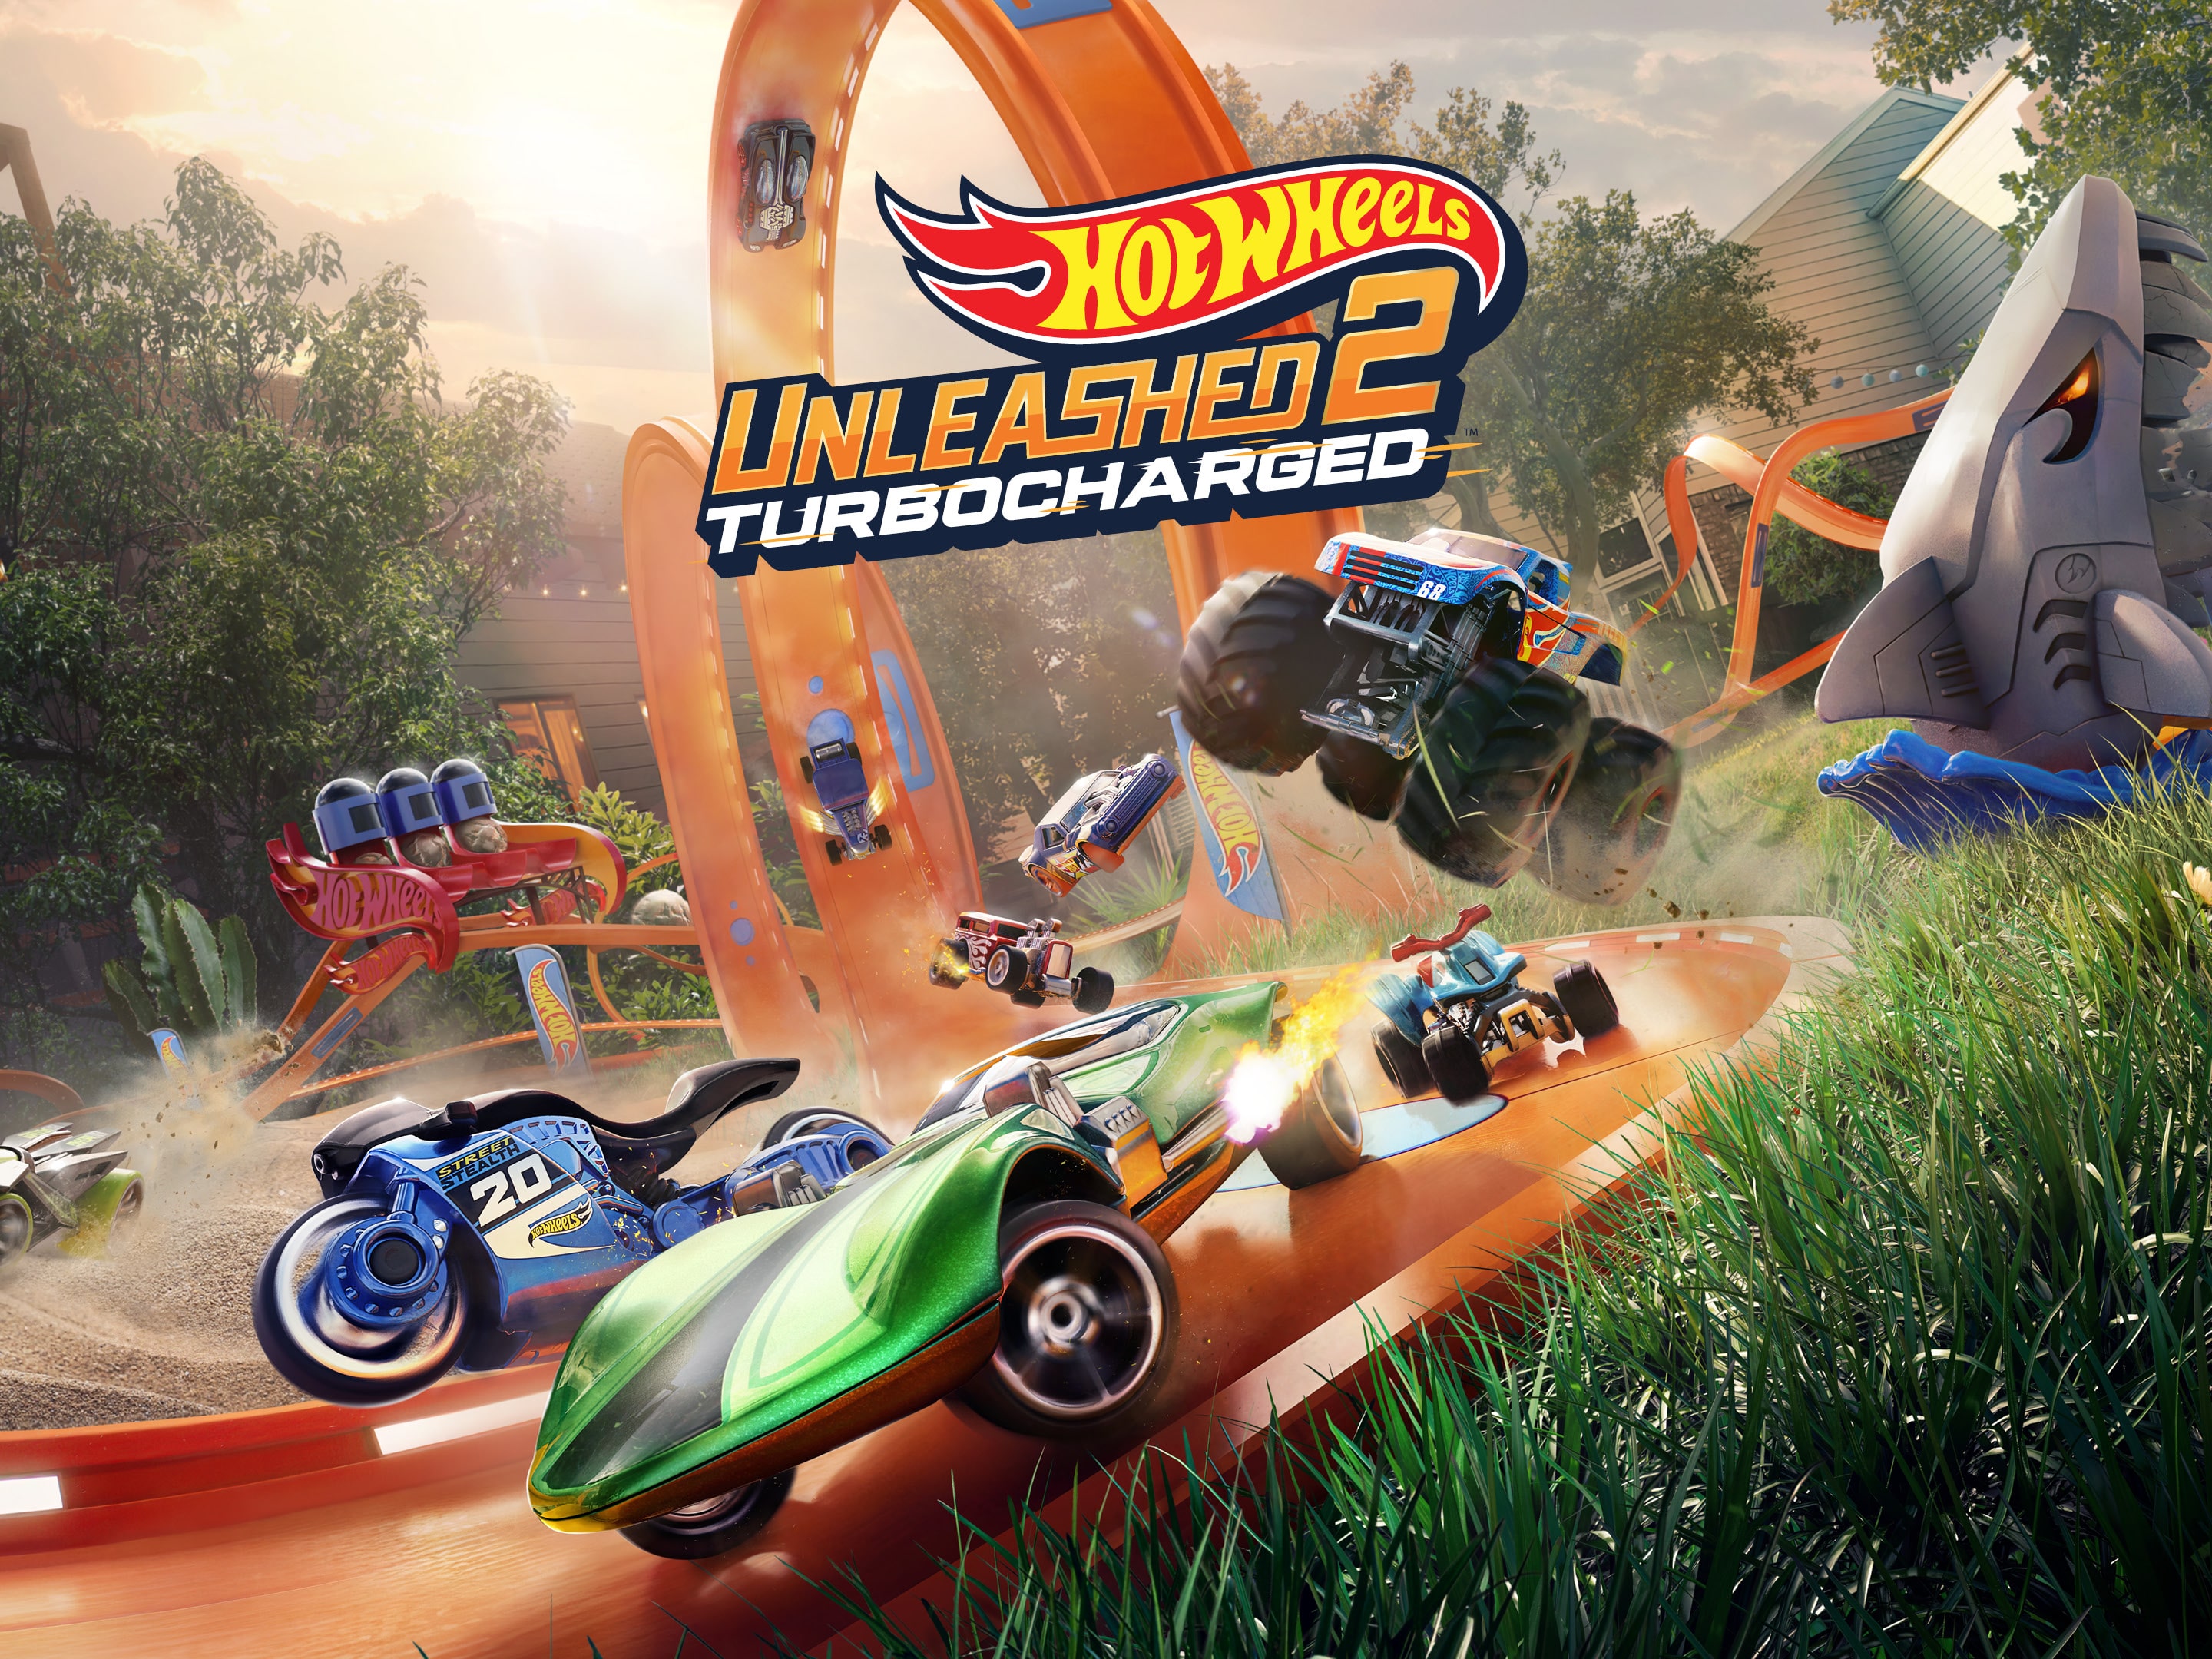 HOT WHEELS Turbocharged PS4 2 & UNLEASHED™ PS5 